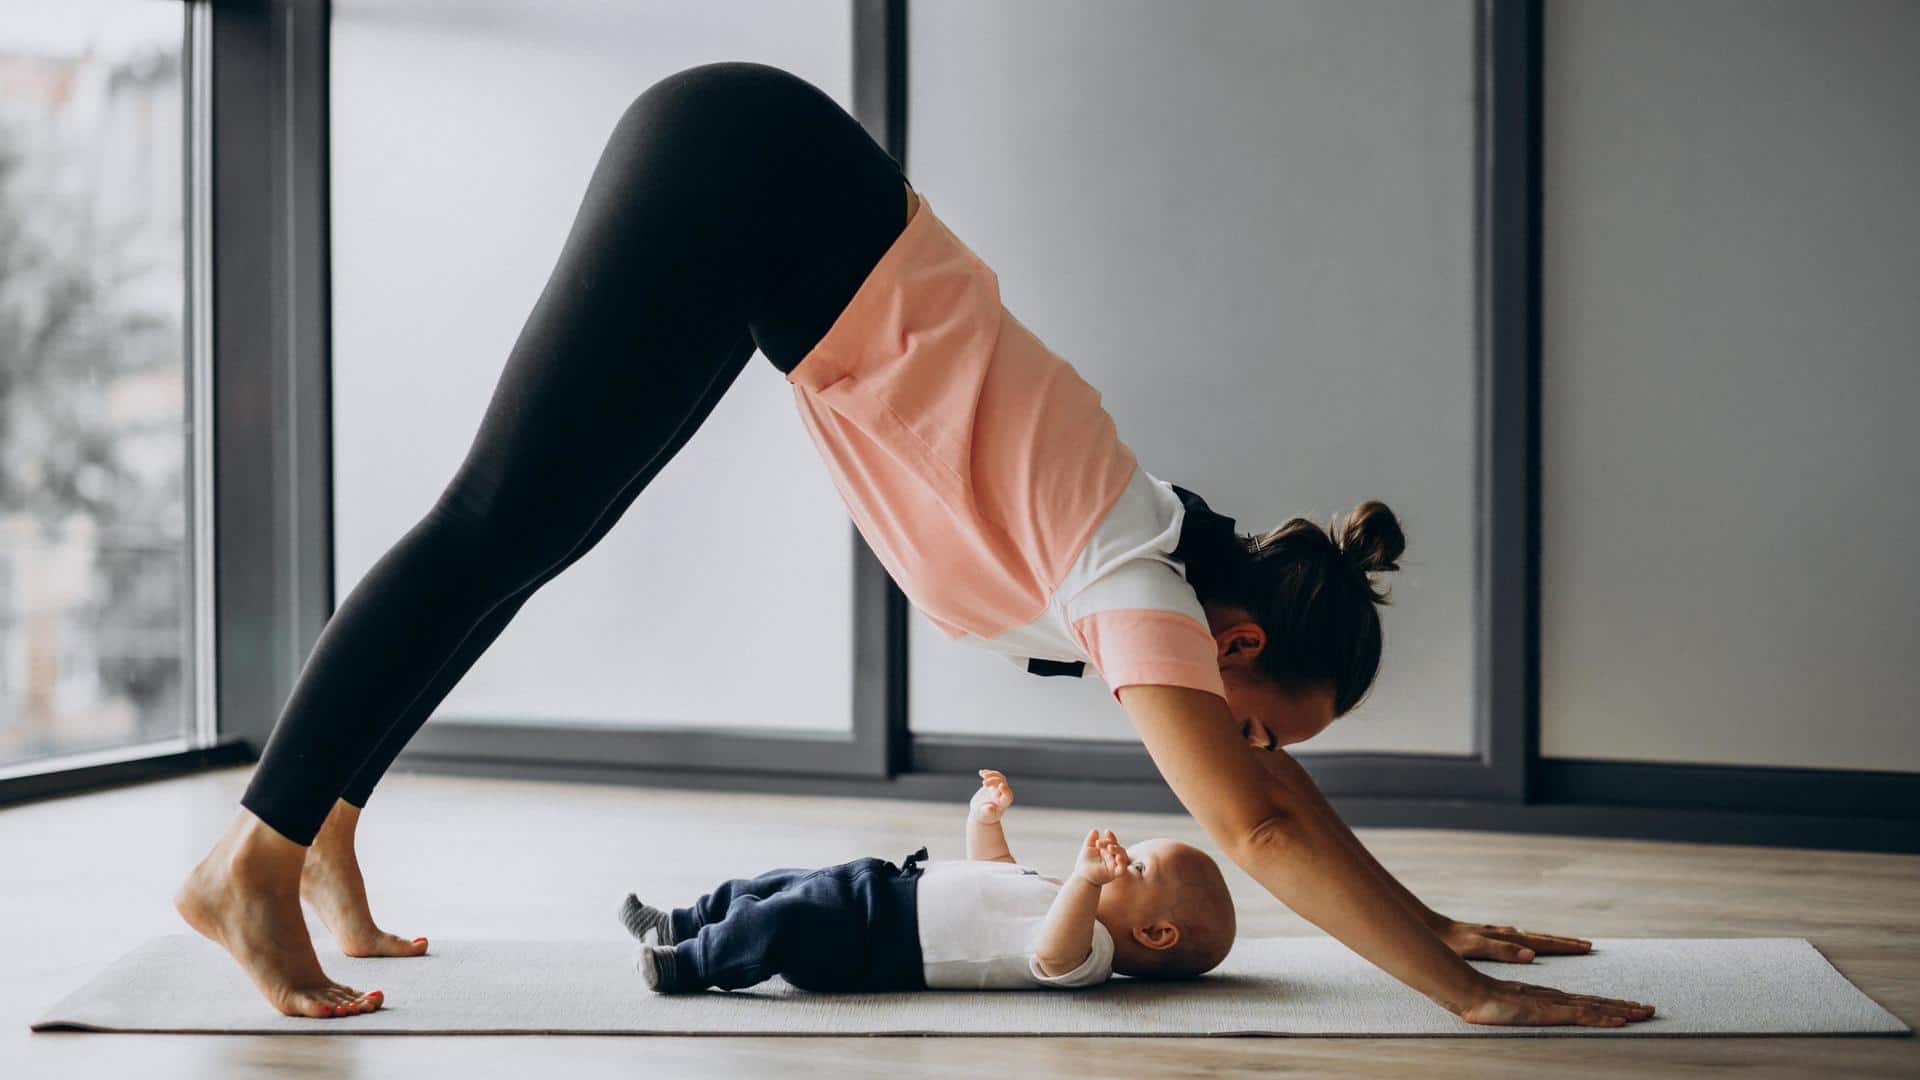 Postpartum exercises: What to include and exclude in your routine